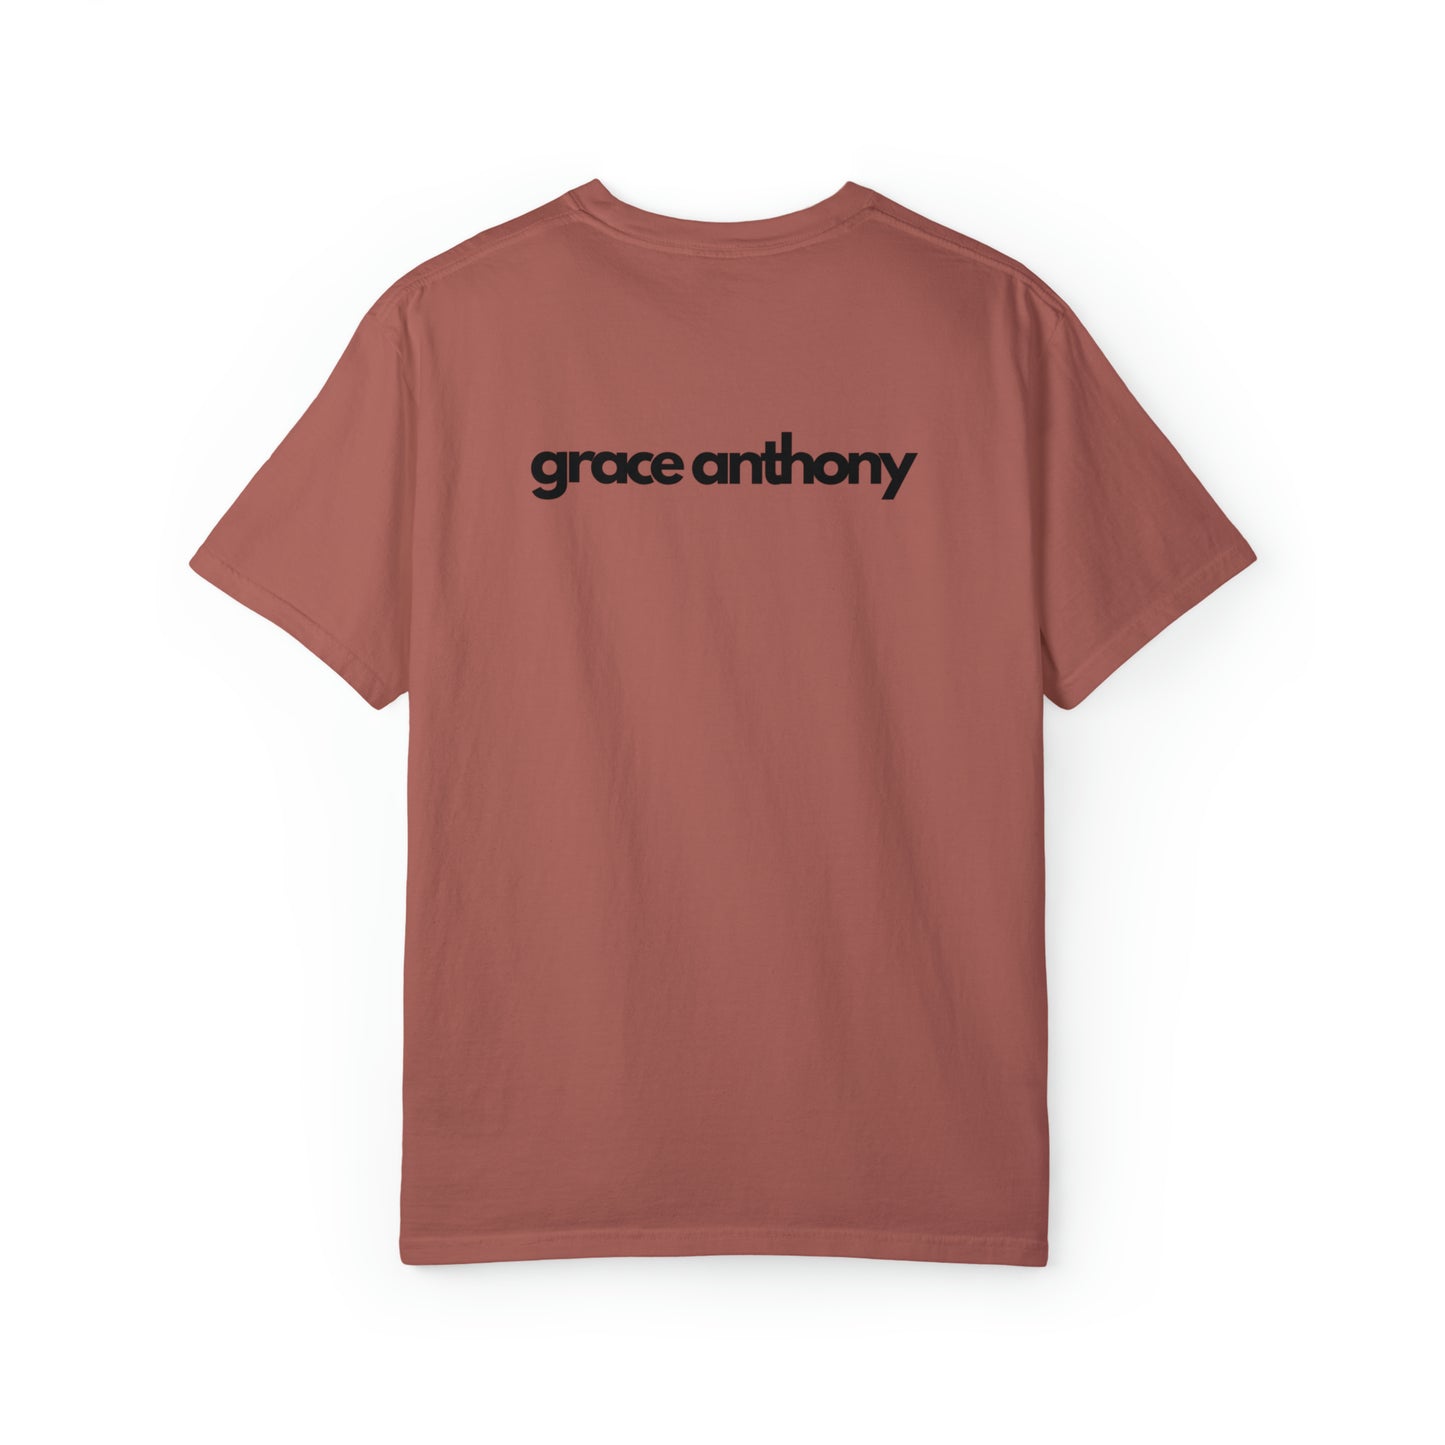 Grace Anthony Logo Shirt, Brand Name T-Shirt, Gift for Mother Father Daughter Son Child Grandparent Teacher Nurse, Journals Note Keeping